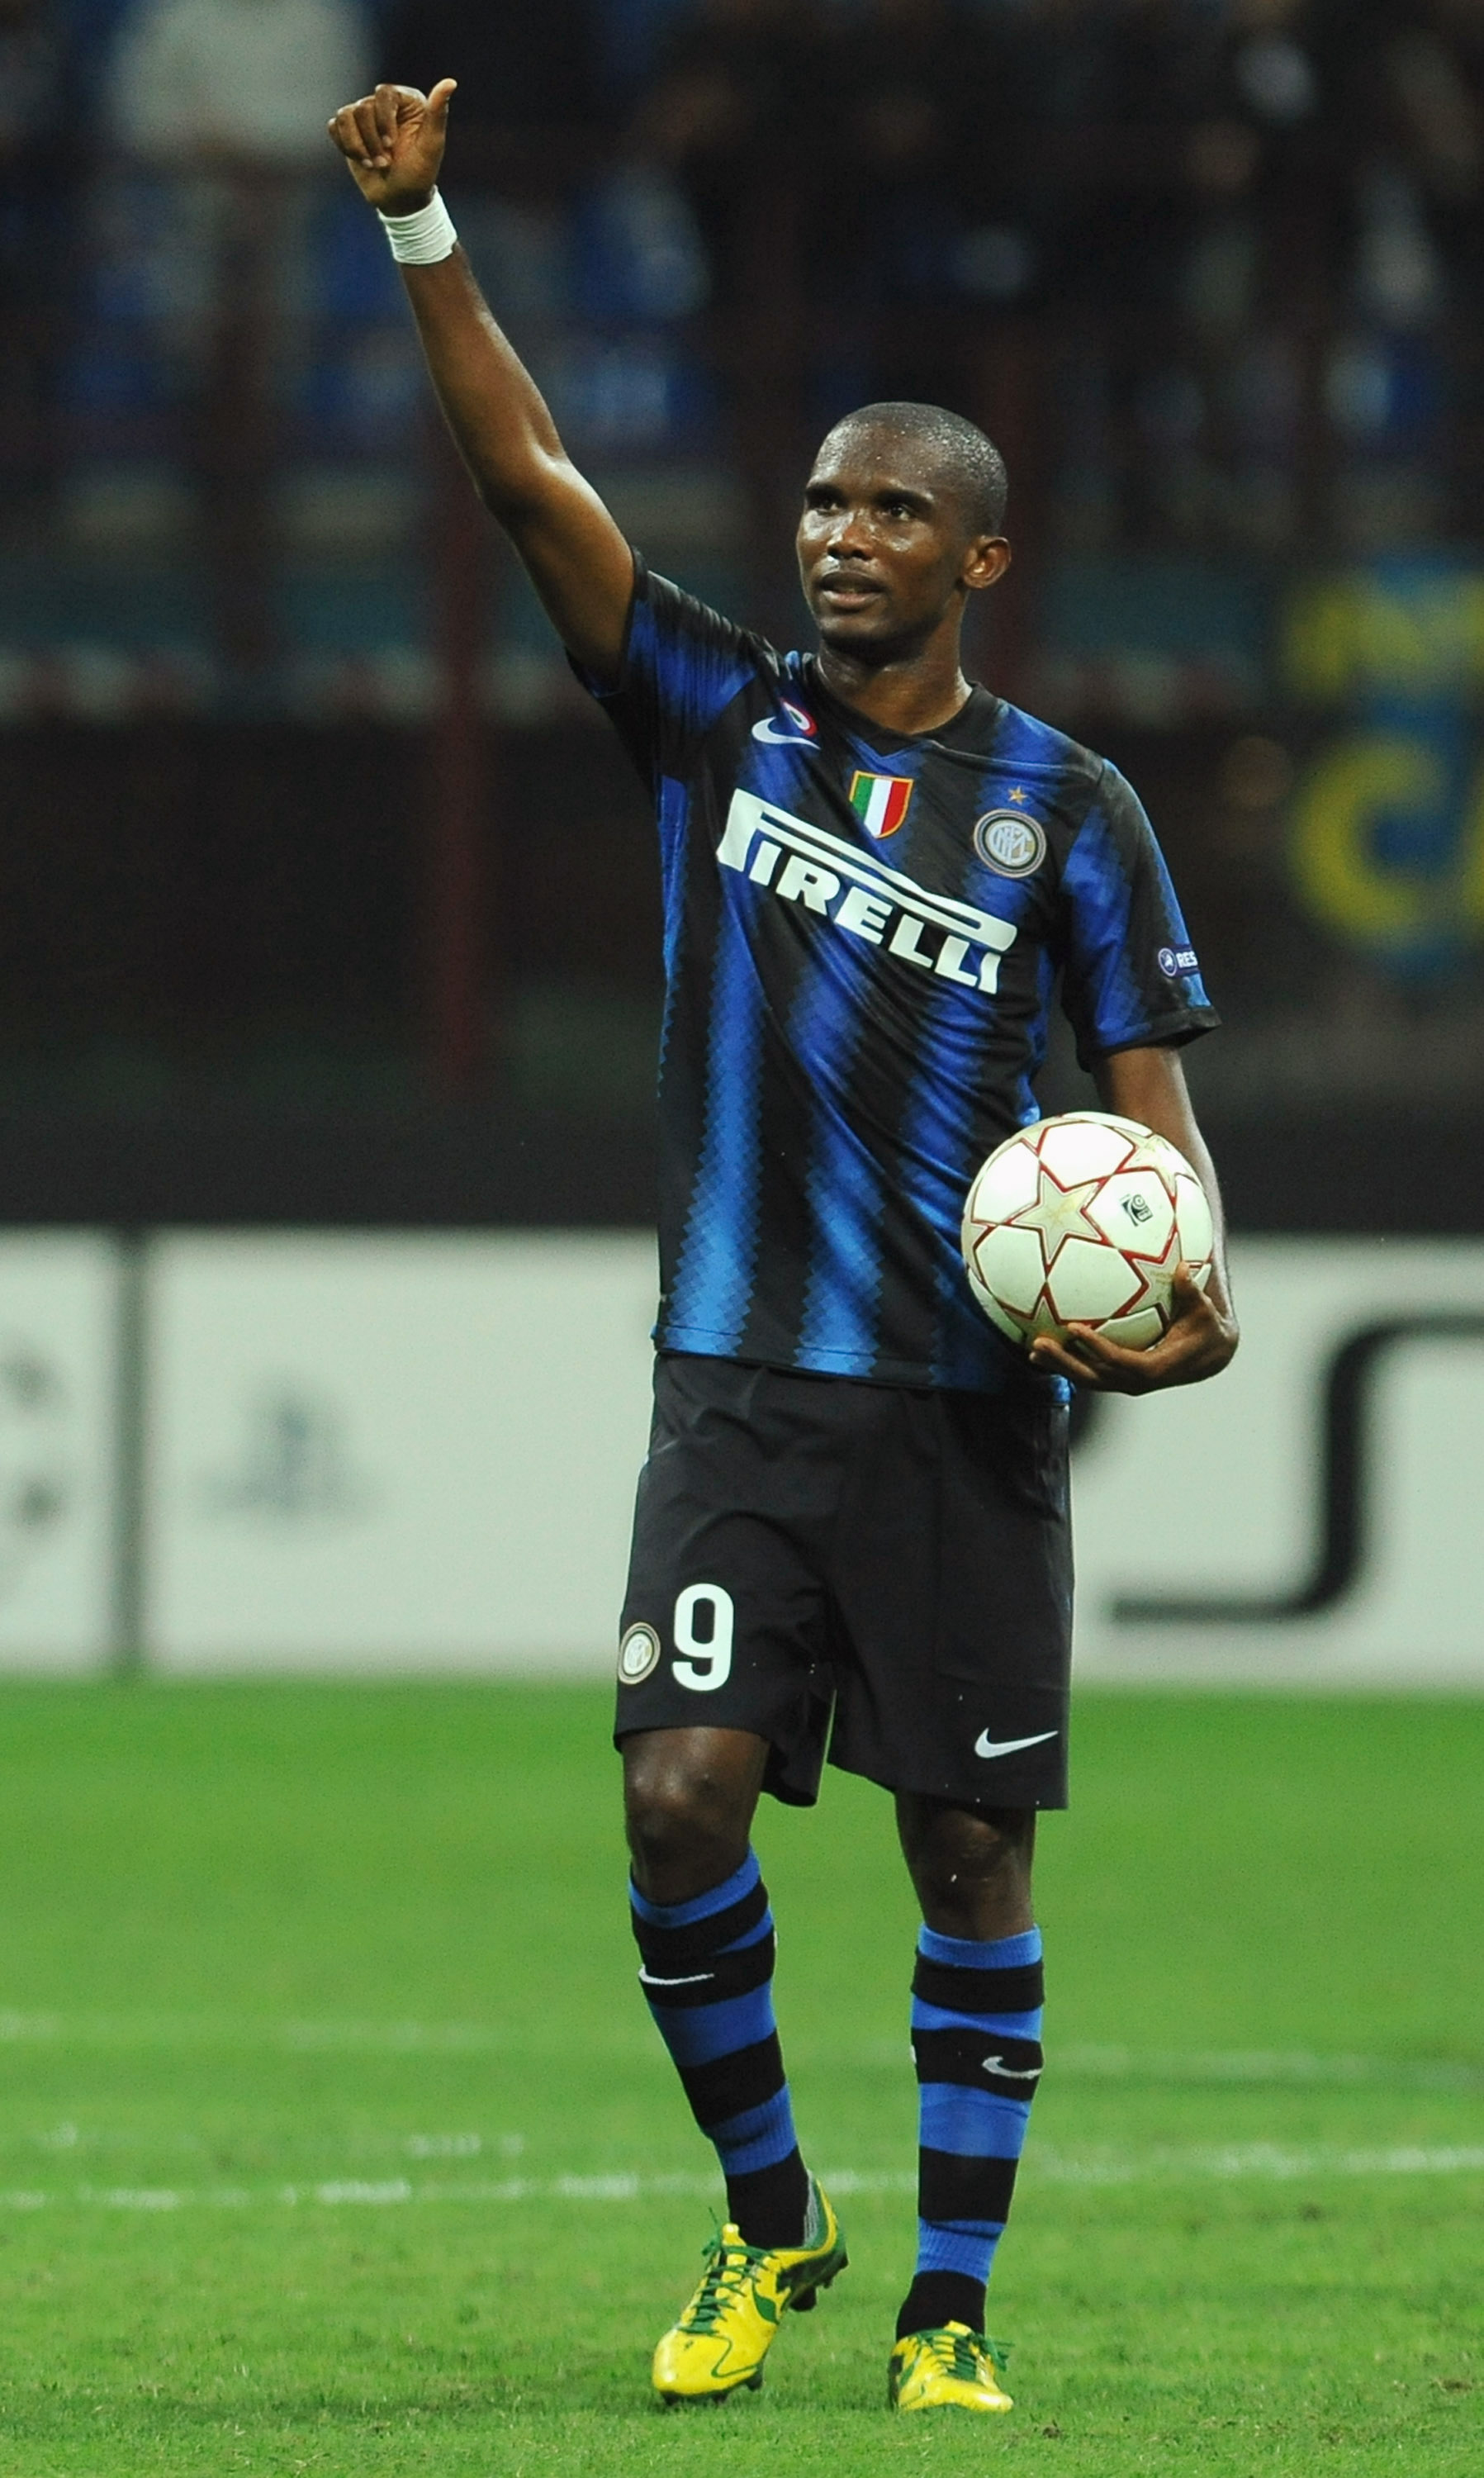 MILAN, ITALY - SEPTEMBER 29:  Samuel Eto'o of FC Internazionale Milano with the ball of the match celebrates victoryafter the UEFA Champions League group A match between FC Internazionale Milano and SV Werder Bremen at Stadio Giuseppe Meazza on September